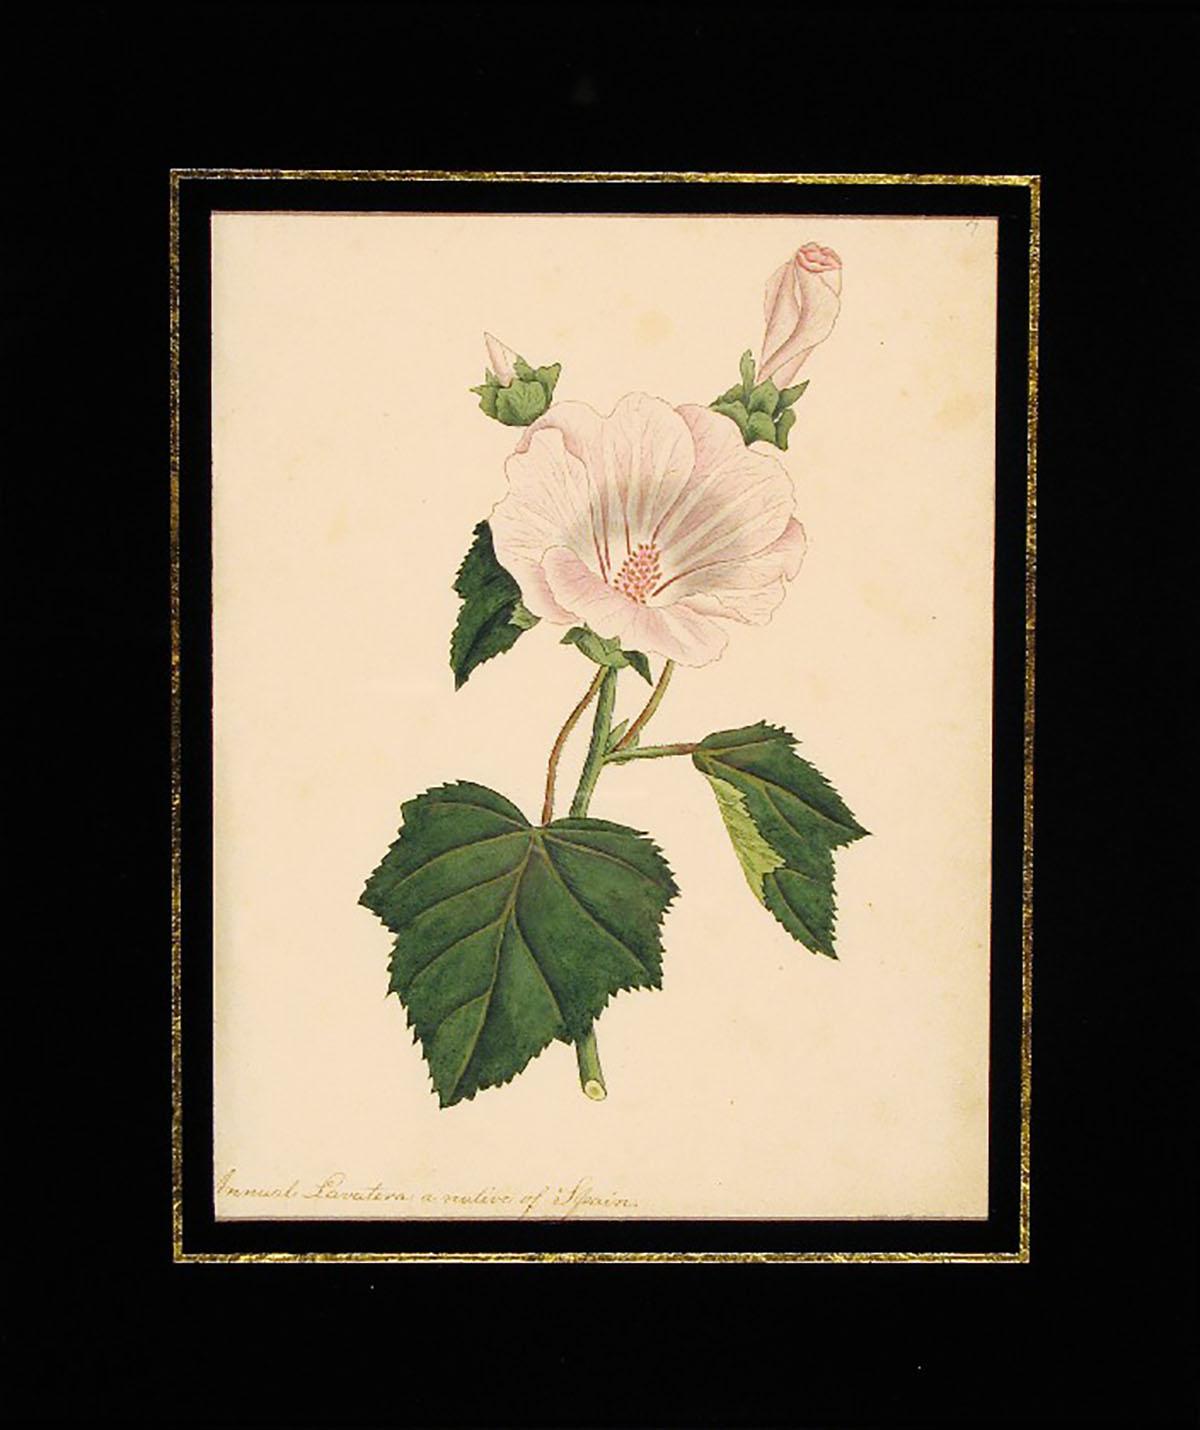 Annual Lavatera a native of Spain - Art by Frances Jauncey Ketchum